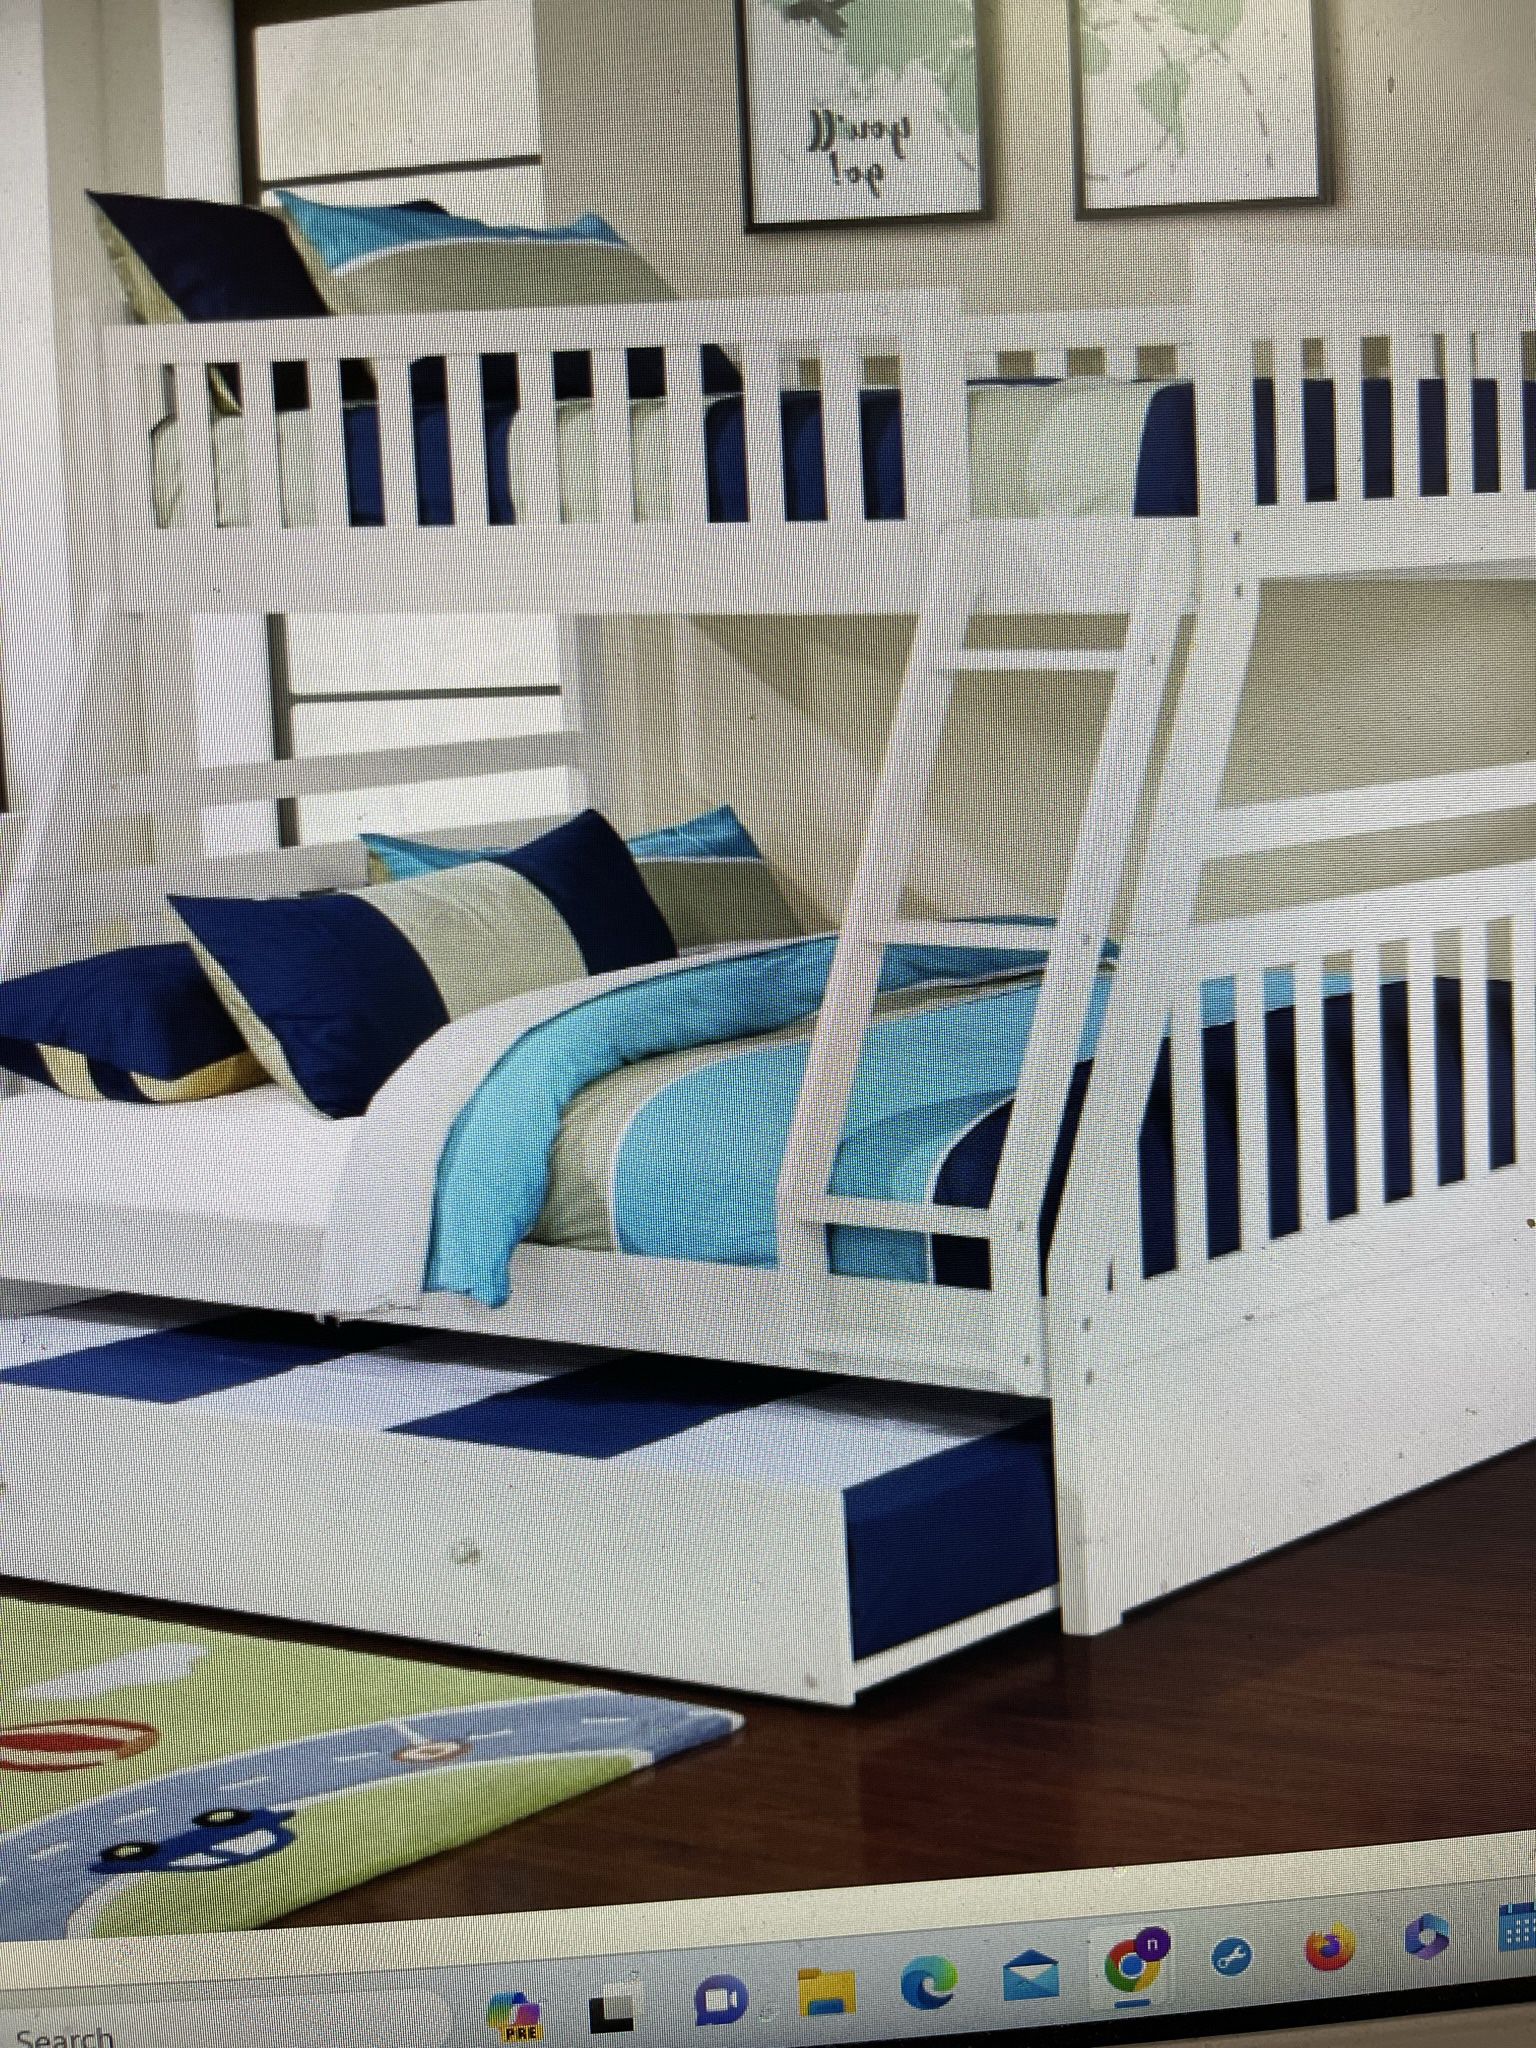 Twin Over Full Bunk Bed On Sale( Mattress Or Trundle Not Included